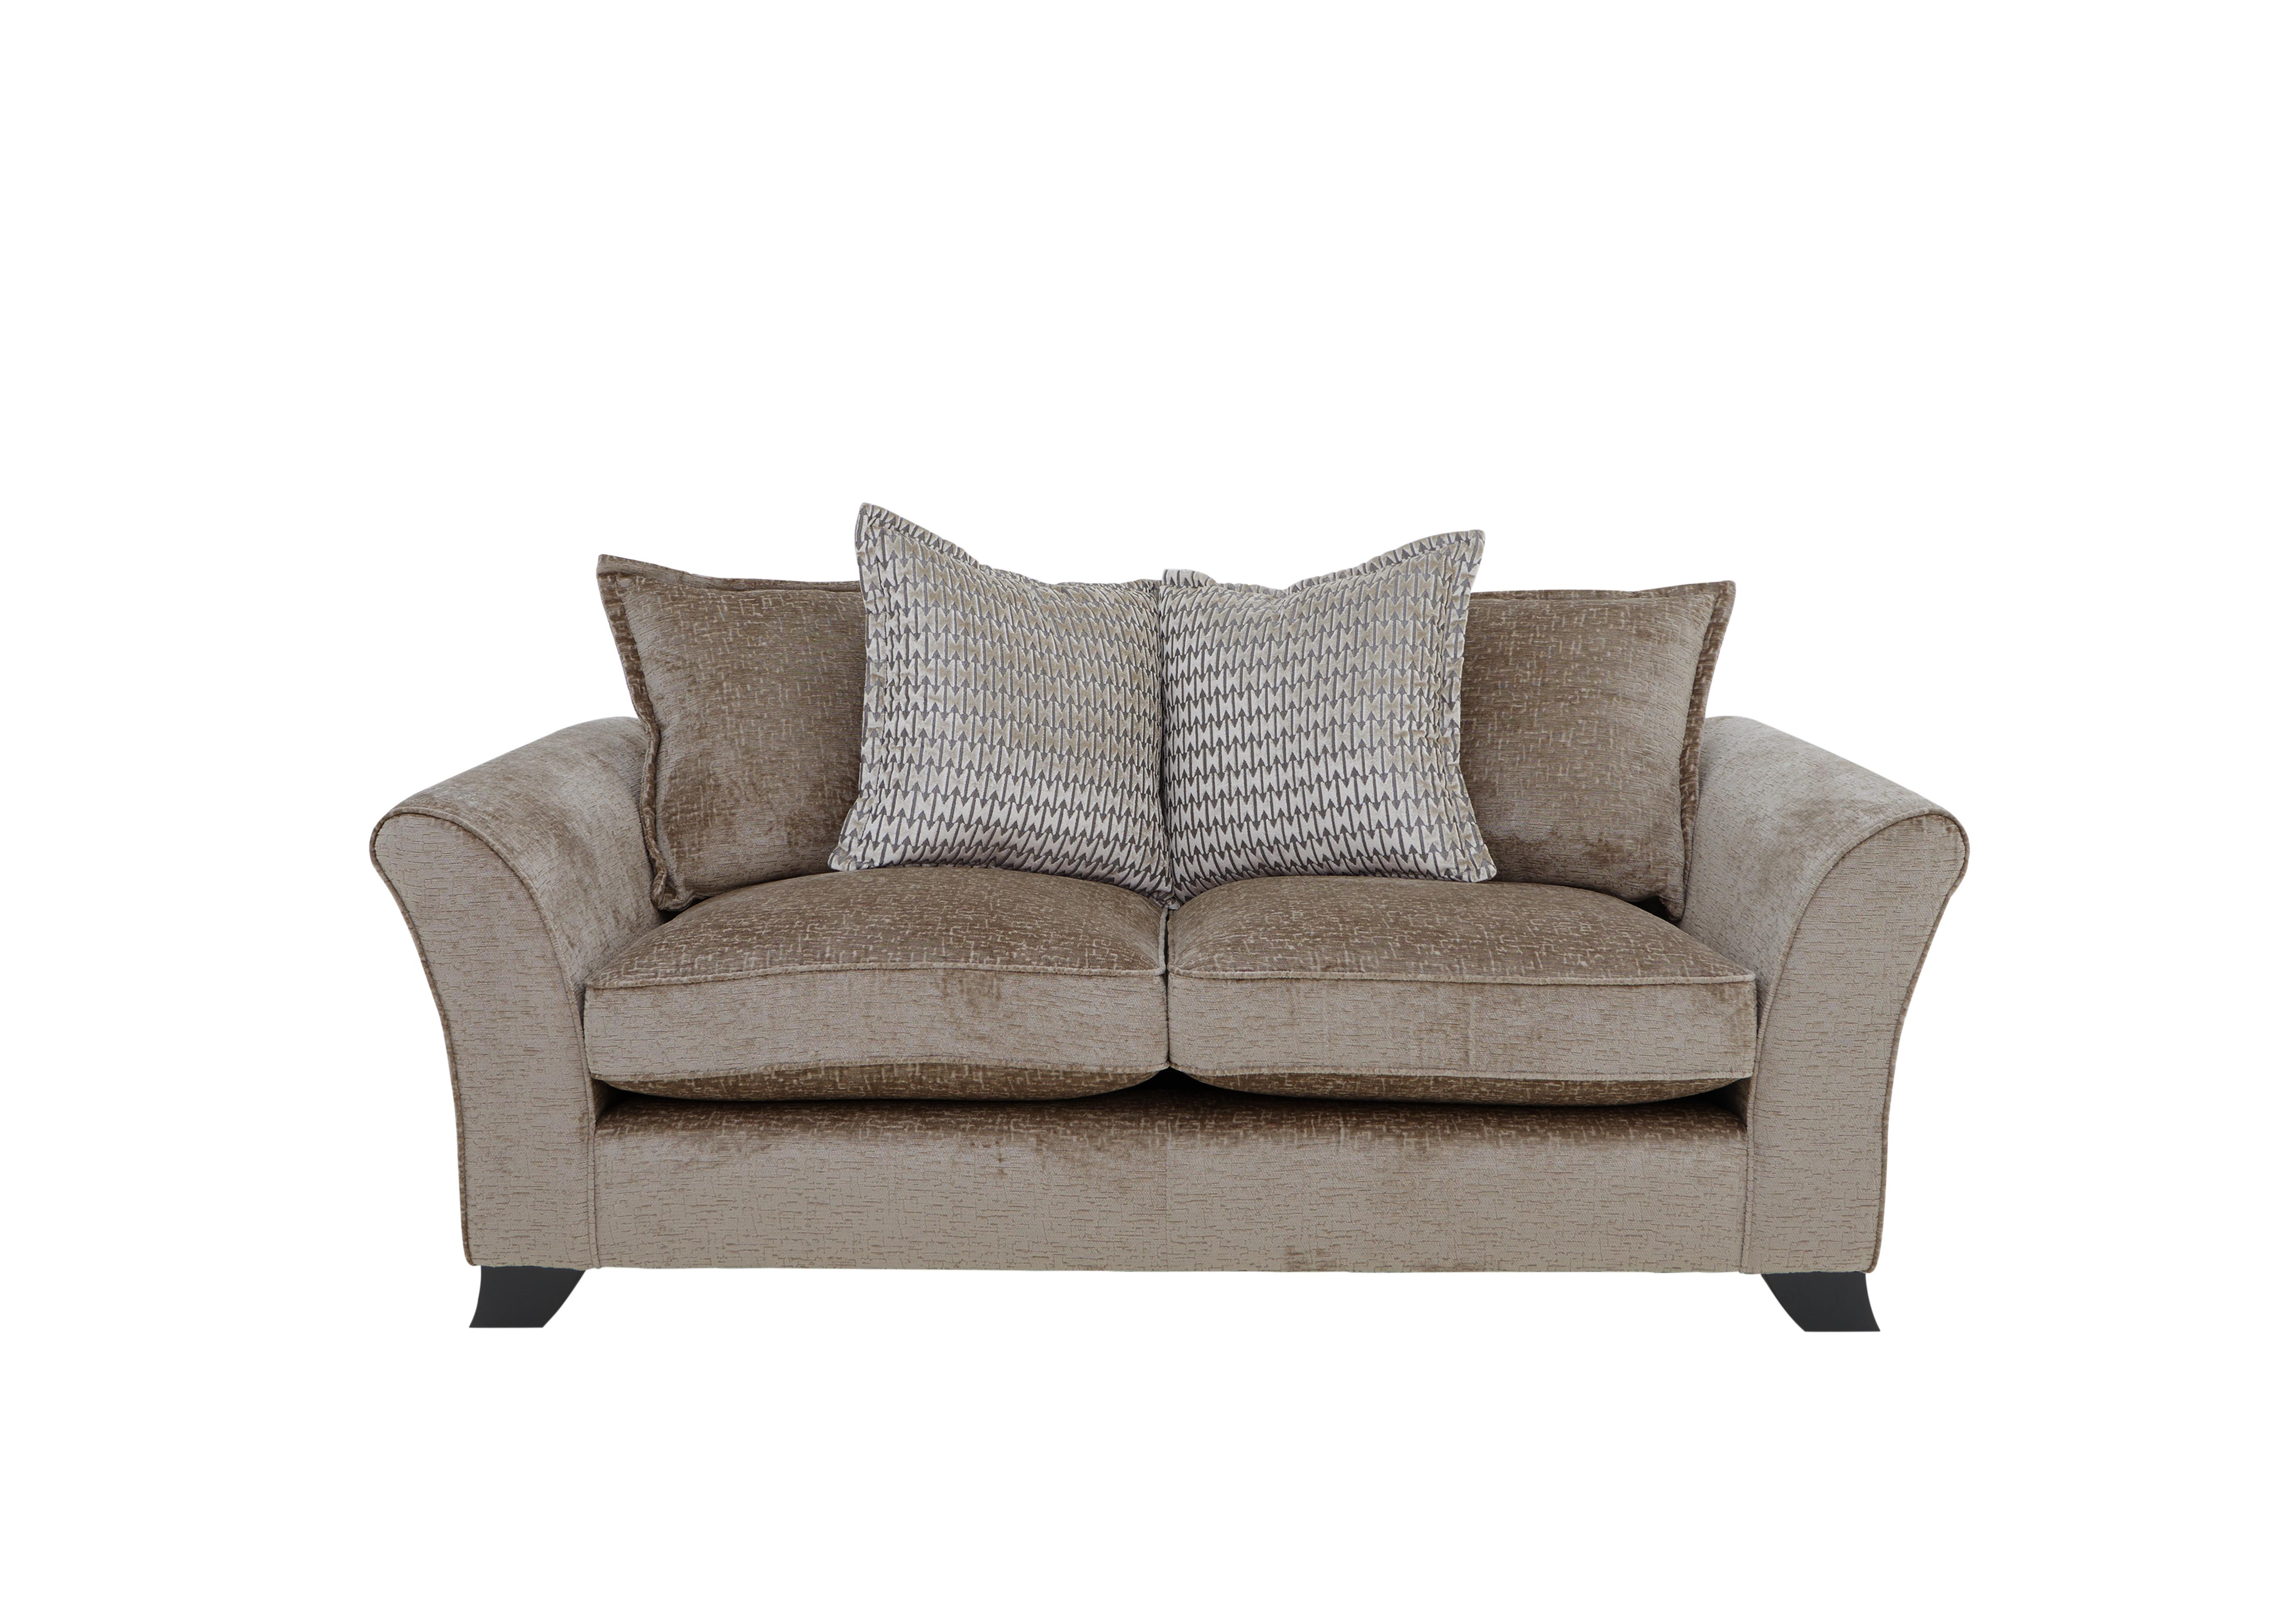 Sasha 3 Seater Scatter Back Sofa Bed in Alexandra Coco on Furniture Village